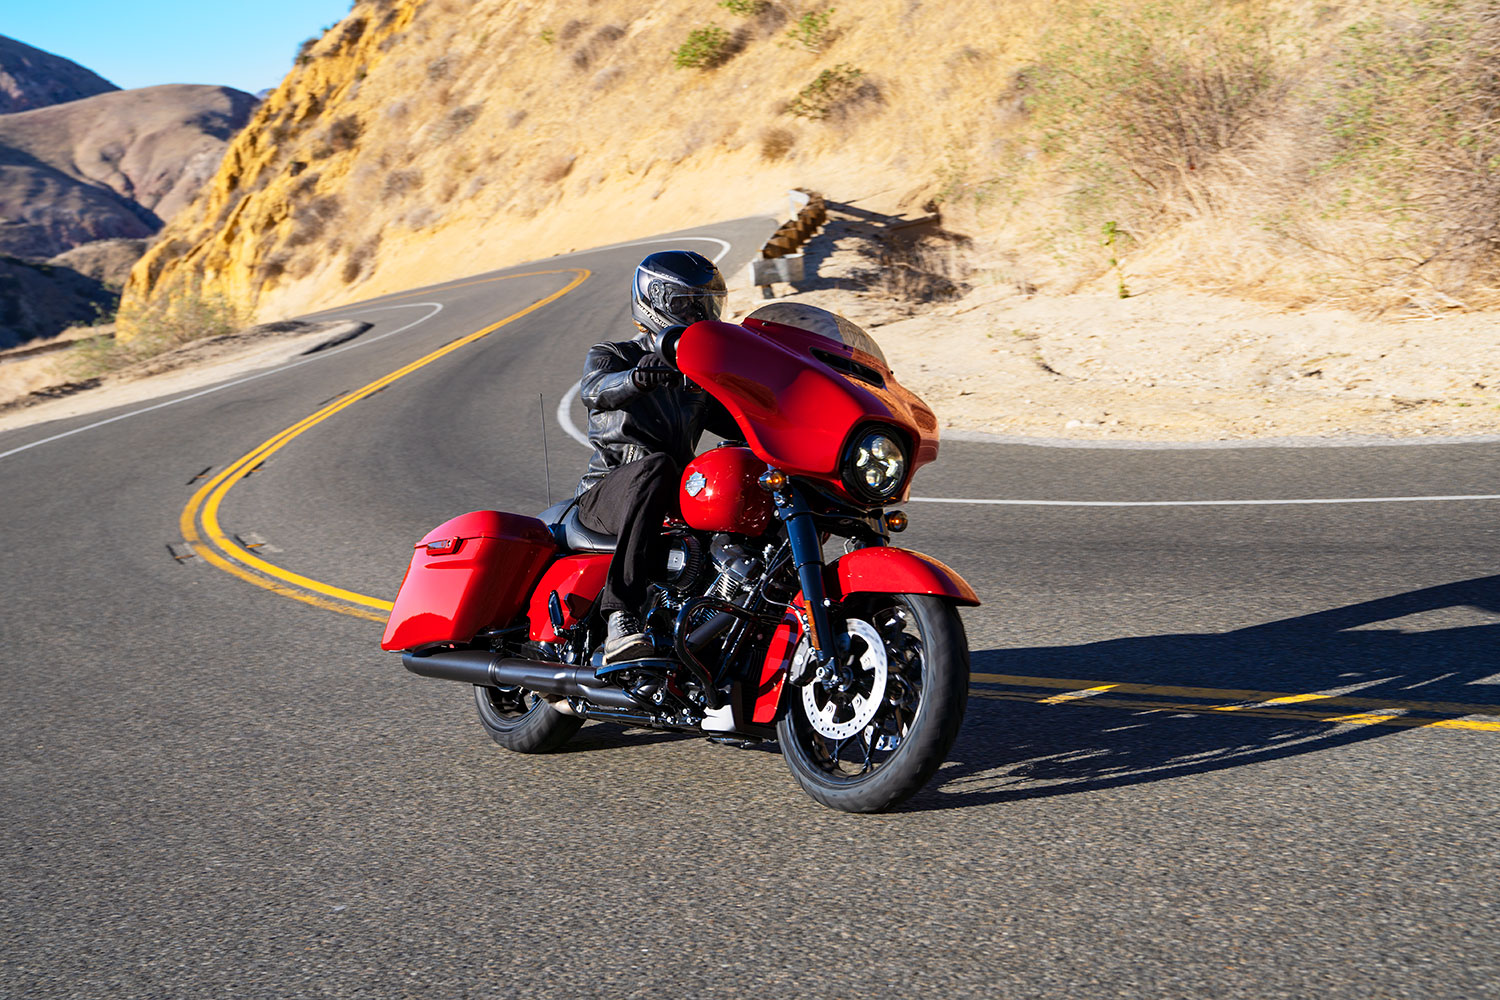 The Harley-Davidson Street Glide: A Touring Bike with Style